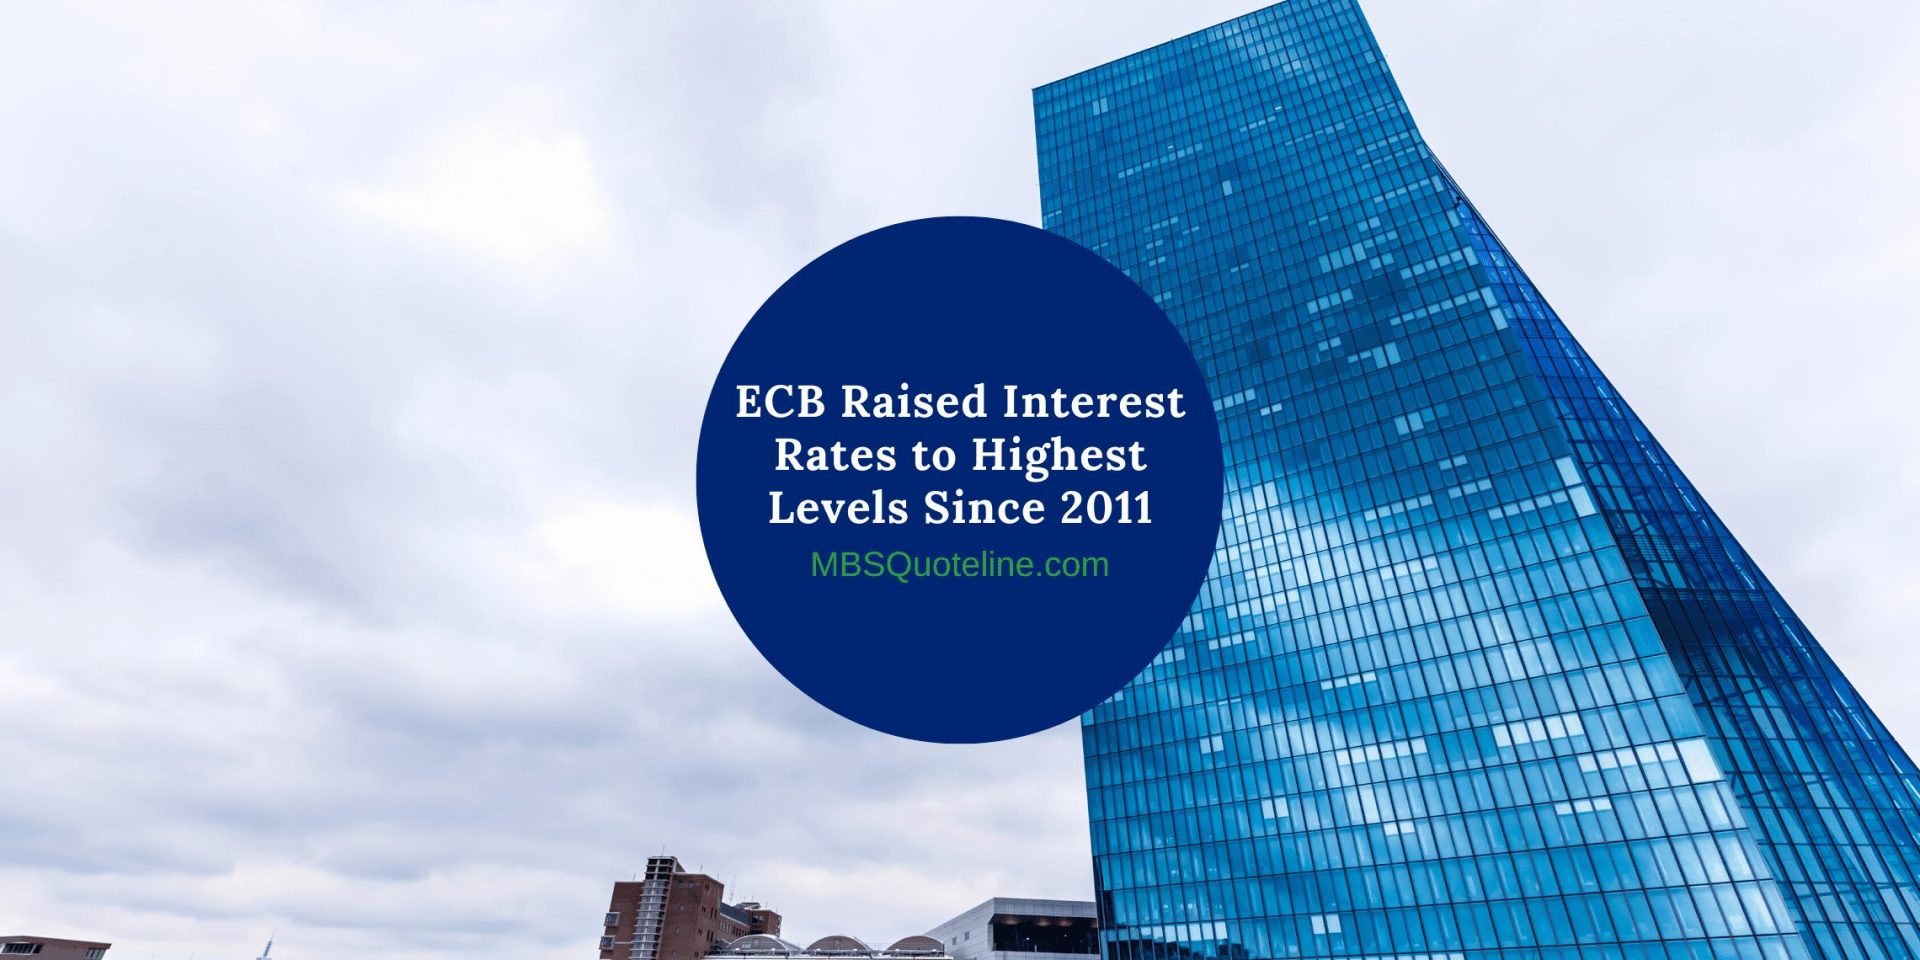 ECB Raised Interest Rates to Highest Levels Since 2011 Featured MortgageTime MBSQuoteline